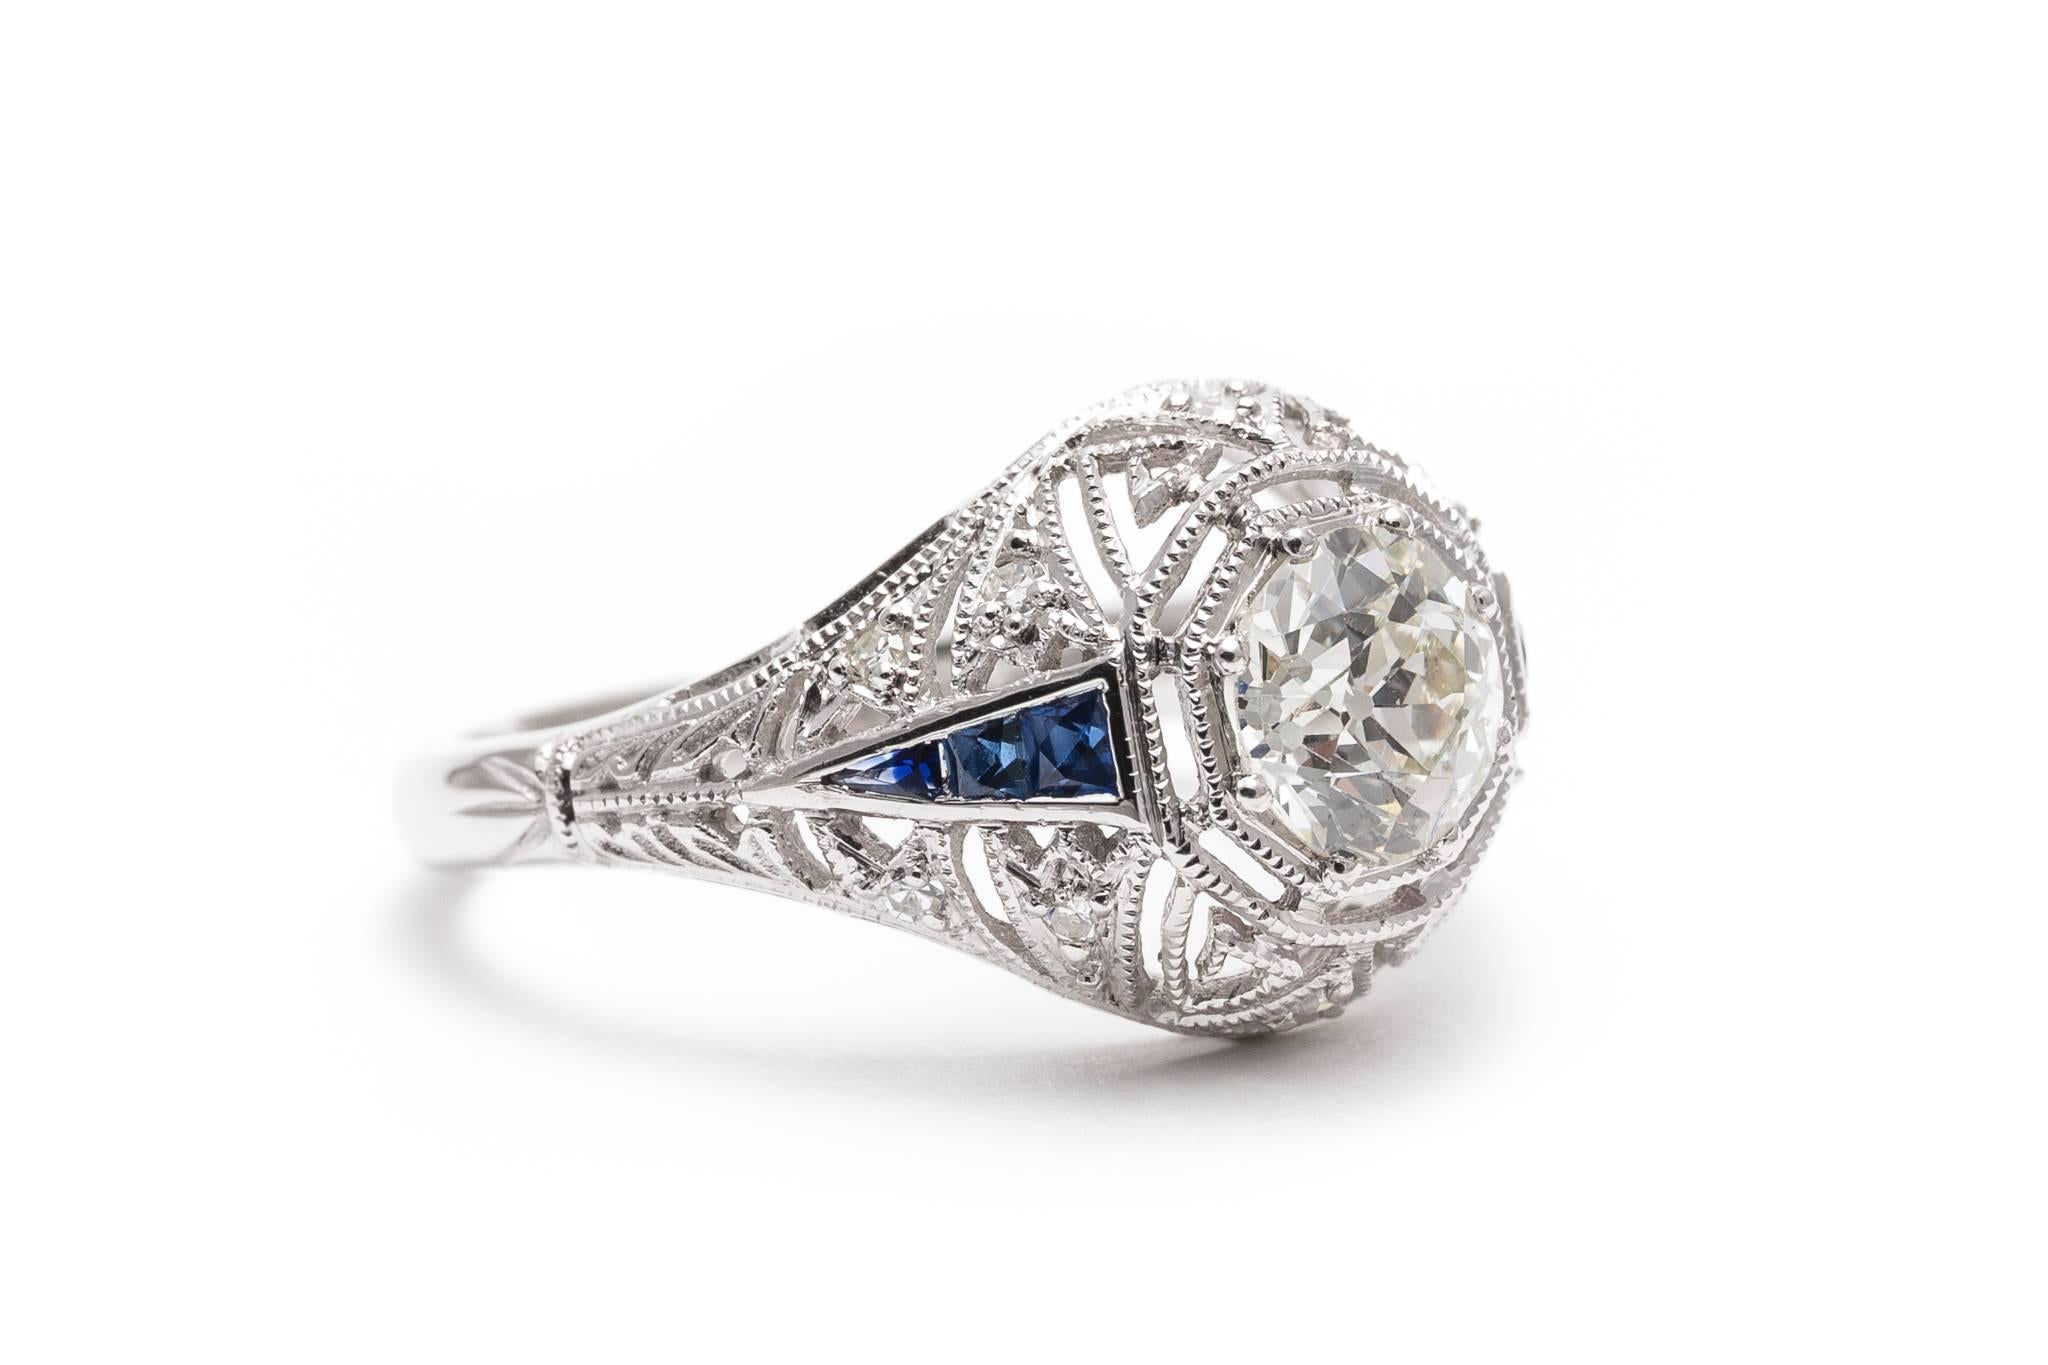 A fantastic a diamond and sapphire engagement ring in luxurious platinum.  Centered by a 1.03 carat antique European cut diamond this ring features a beautiful handmade filigree mounting complimented by rich French cut sapphires.

Of beautiful VS